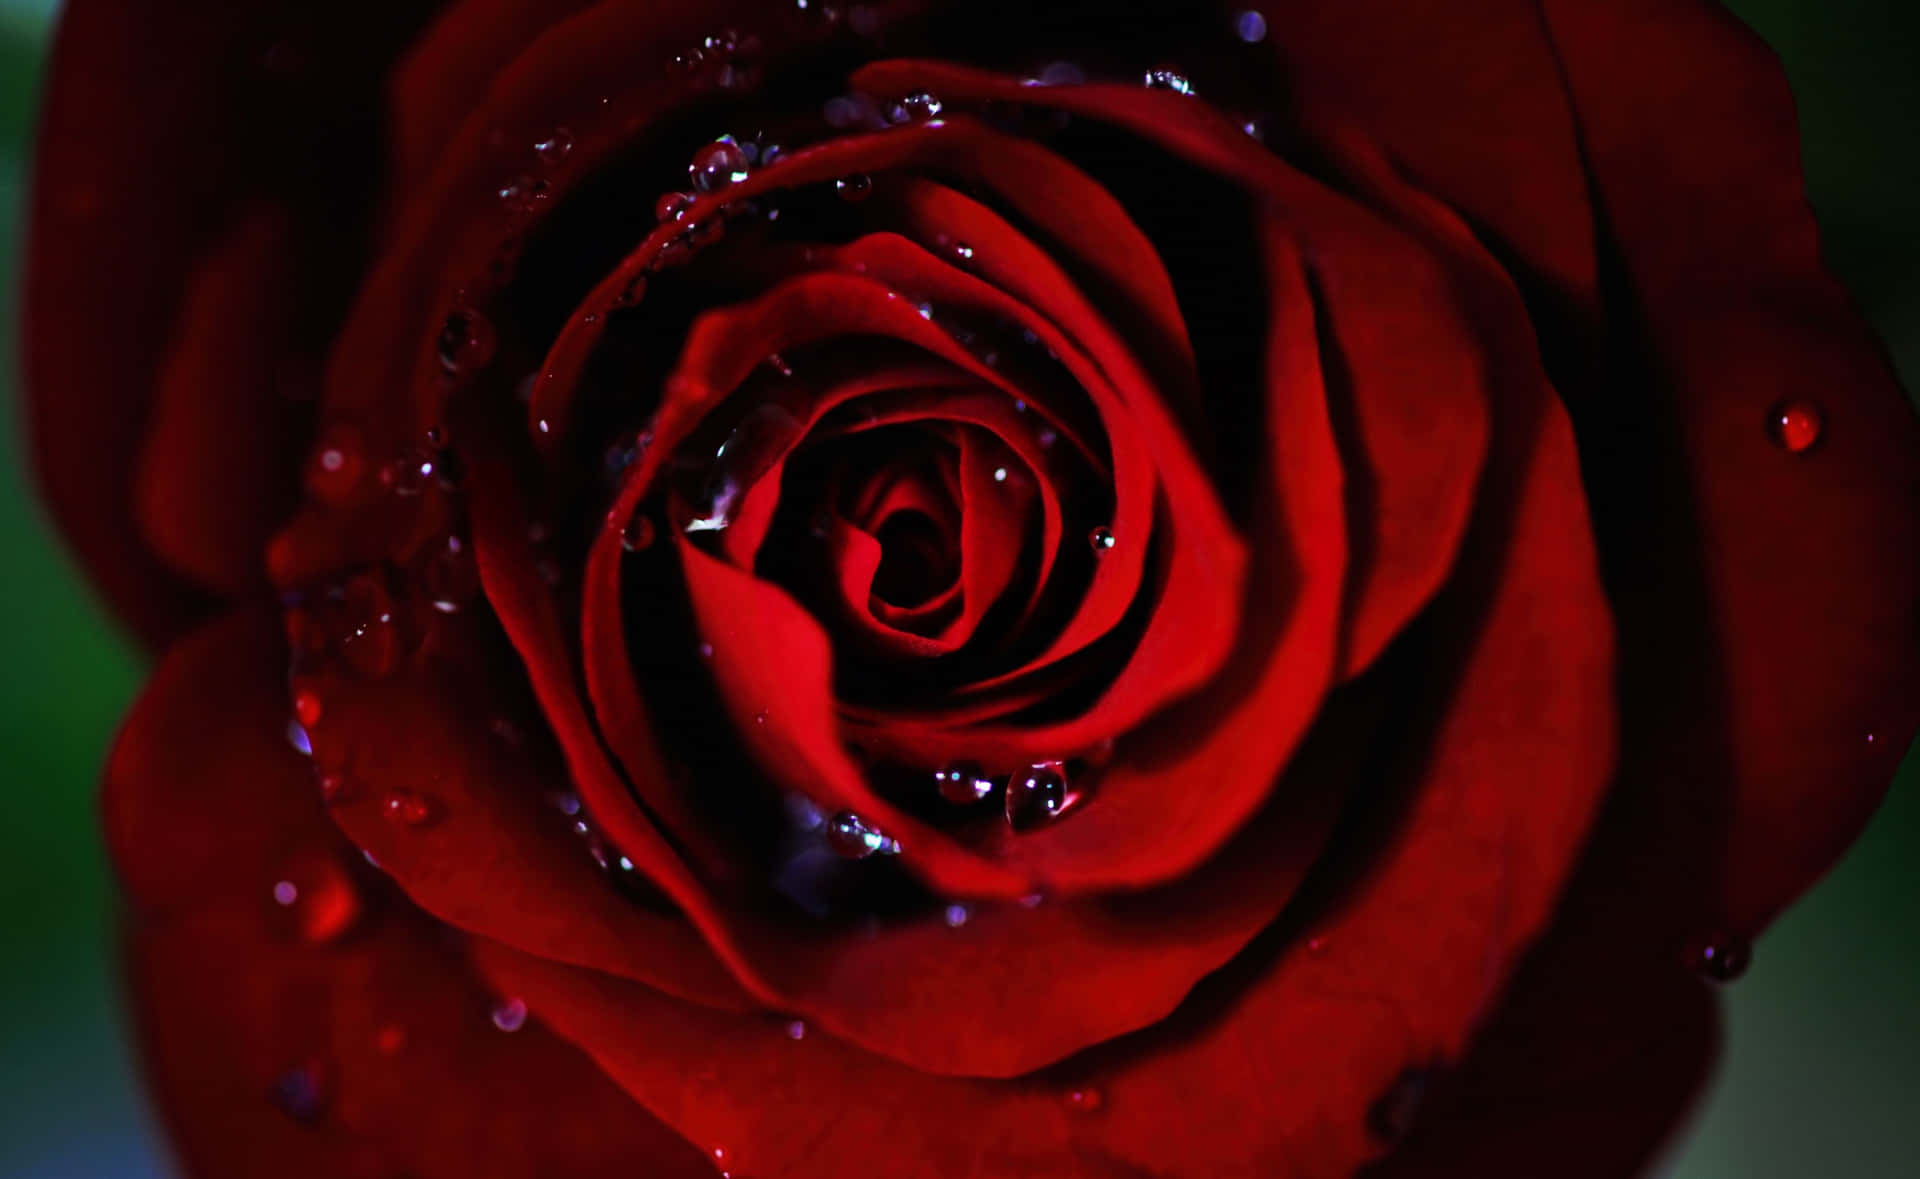 Red Roses Laptop With Beads Of Water Wallpaper